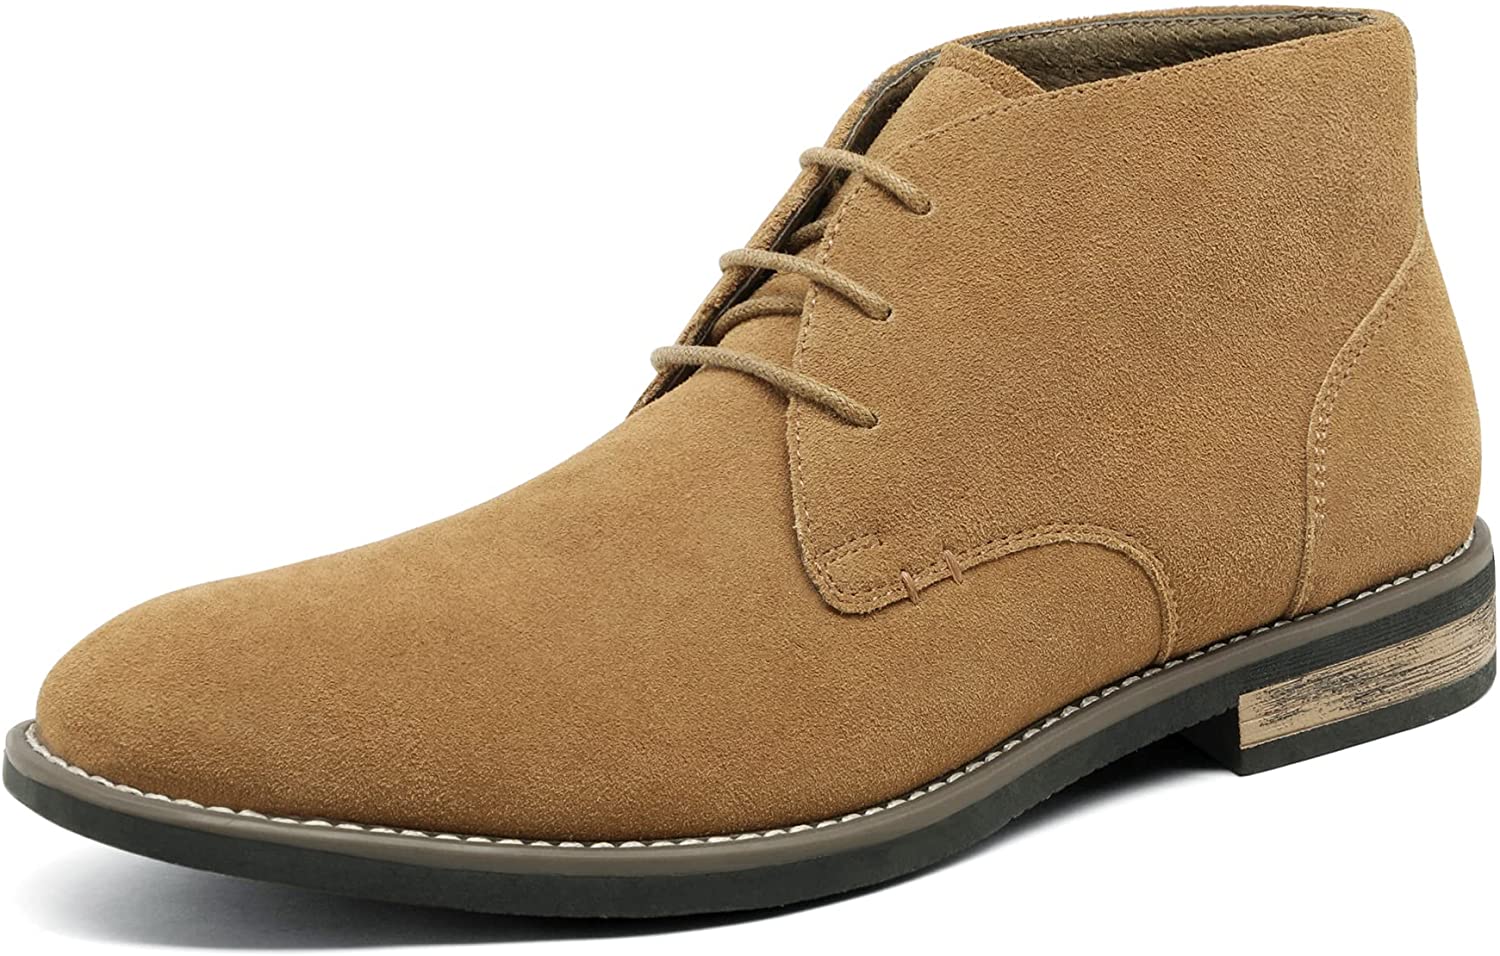 Bruno Marc Mens Oxford Shoes Suede Leather Casual Ankle Chukka Boots Size 6.5-15